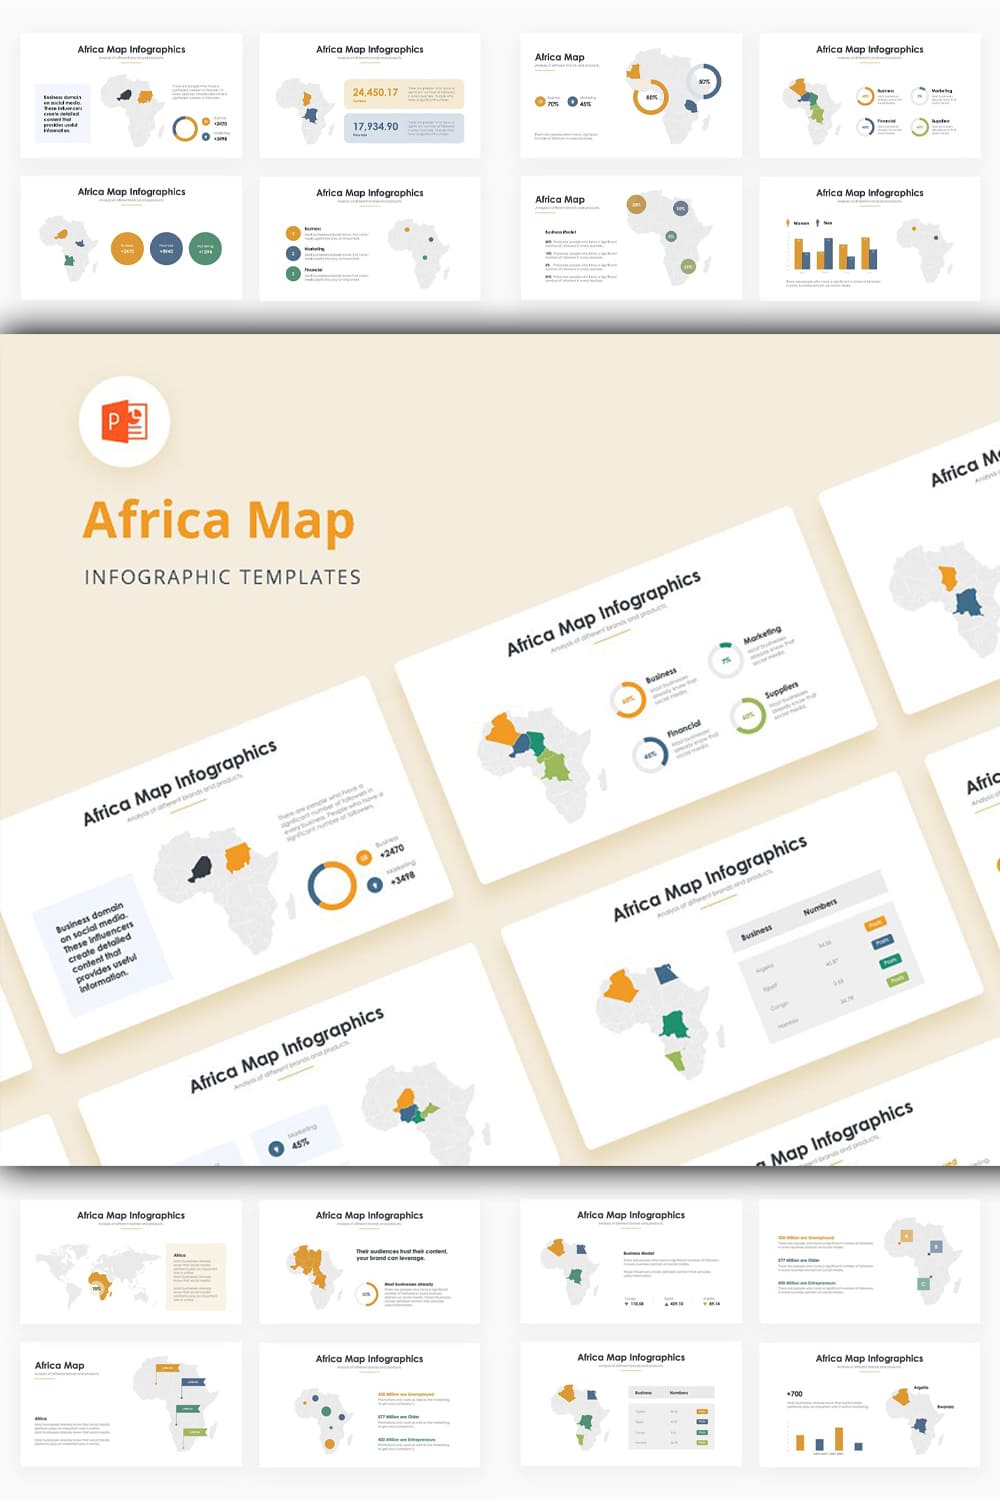 Africa Map Infographics - PowerPoint pinterest image.